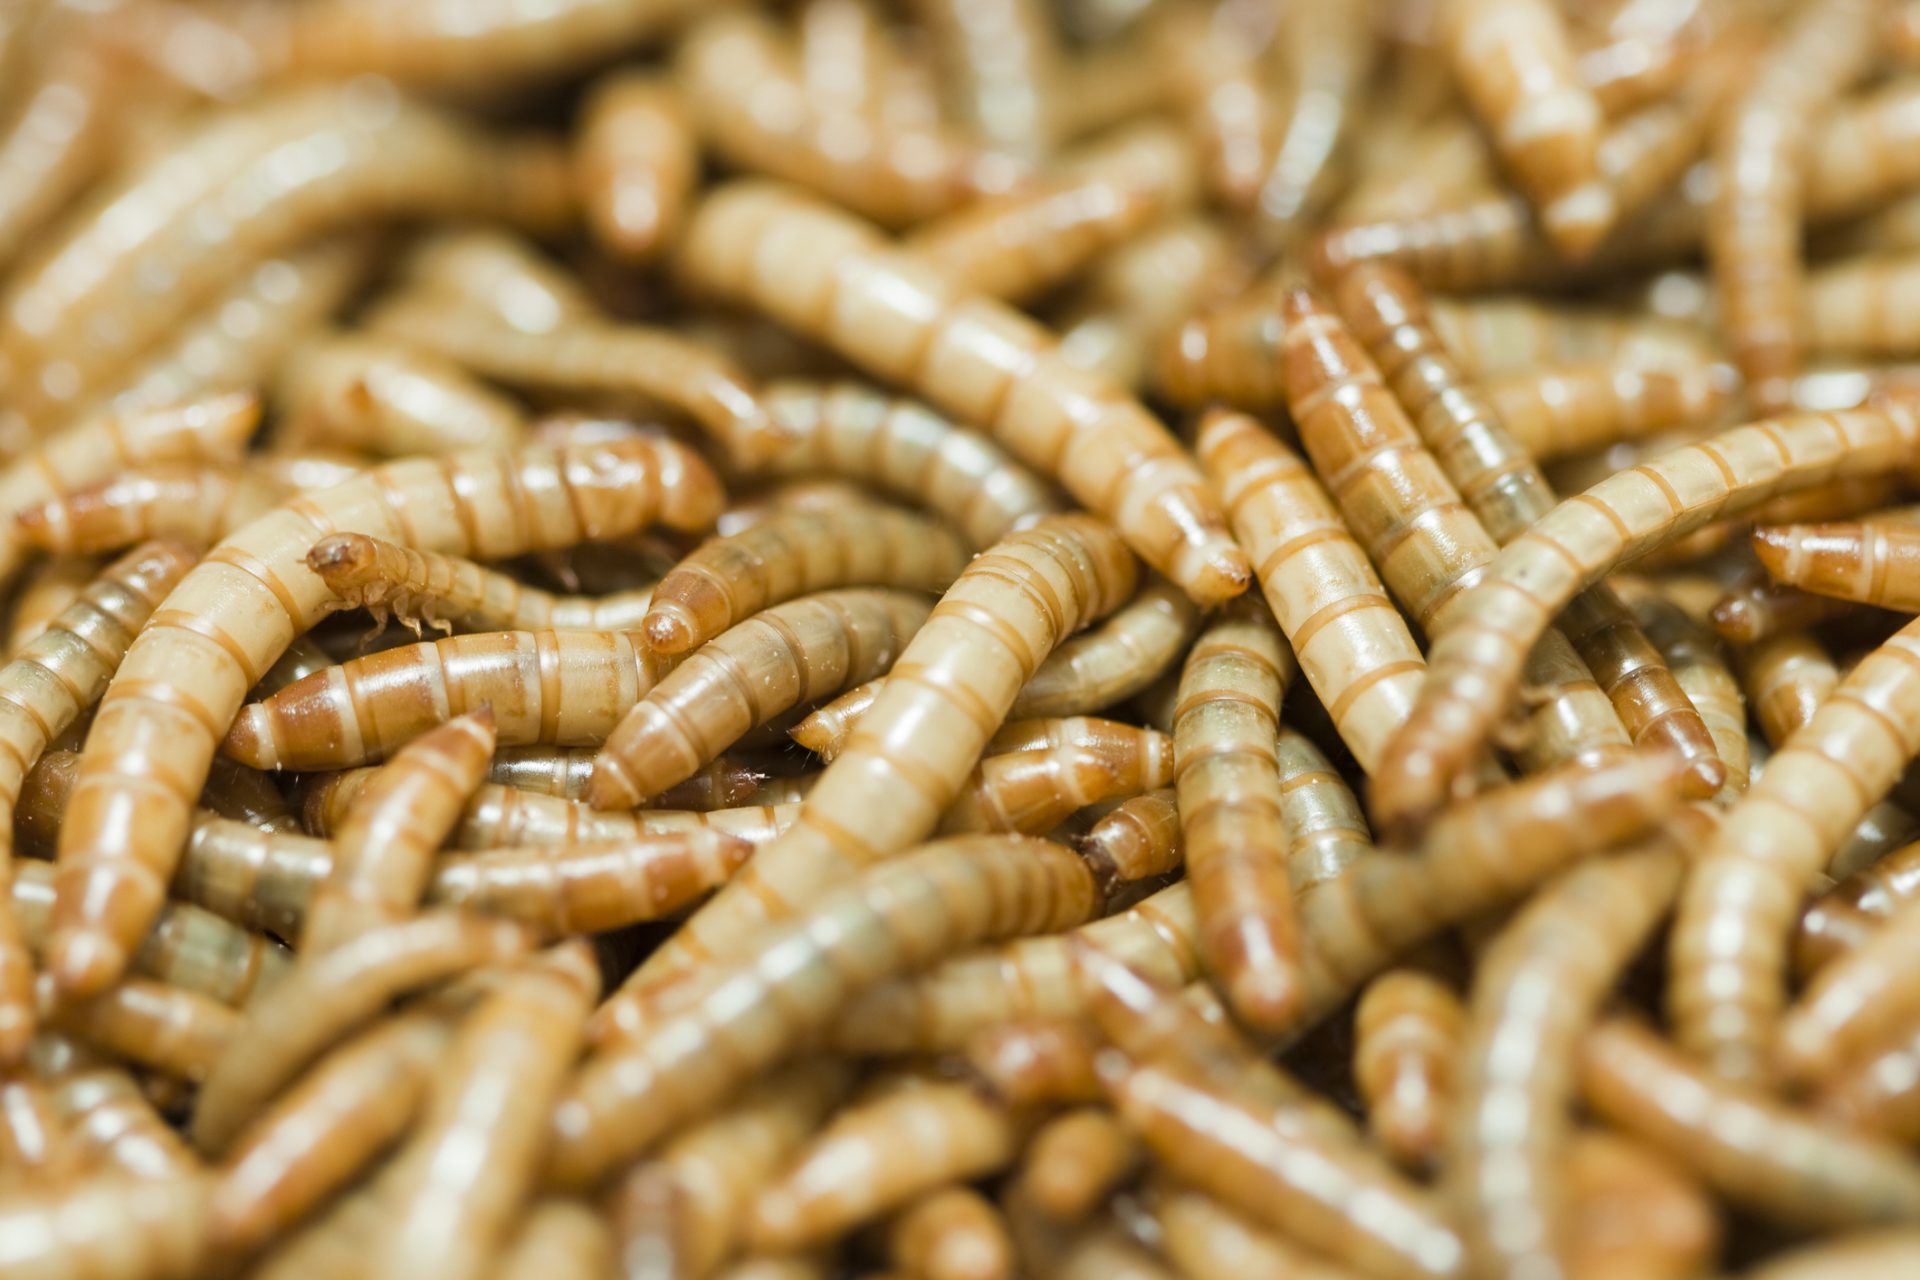 Mealworms might be the key 